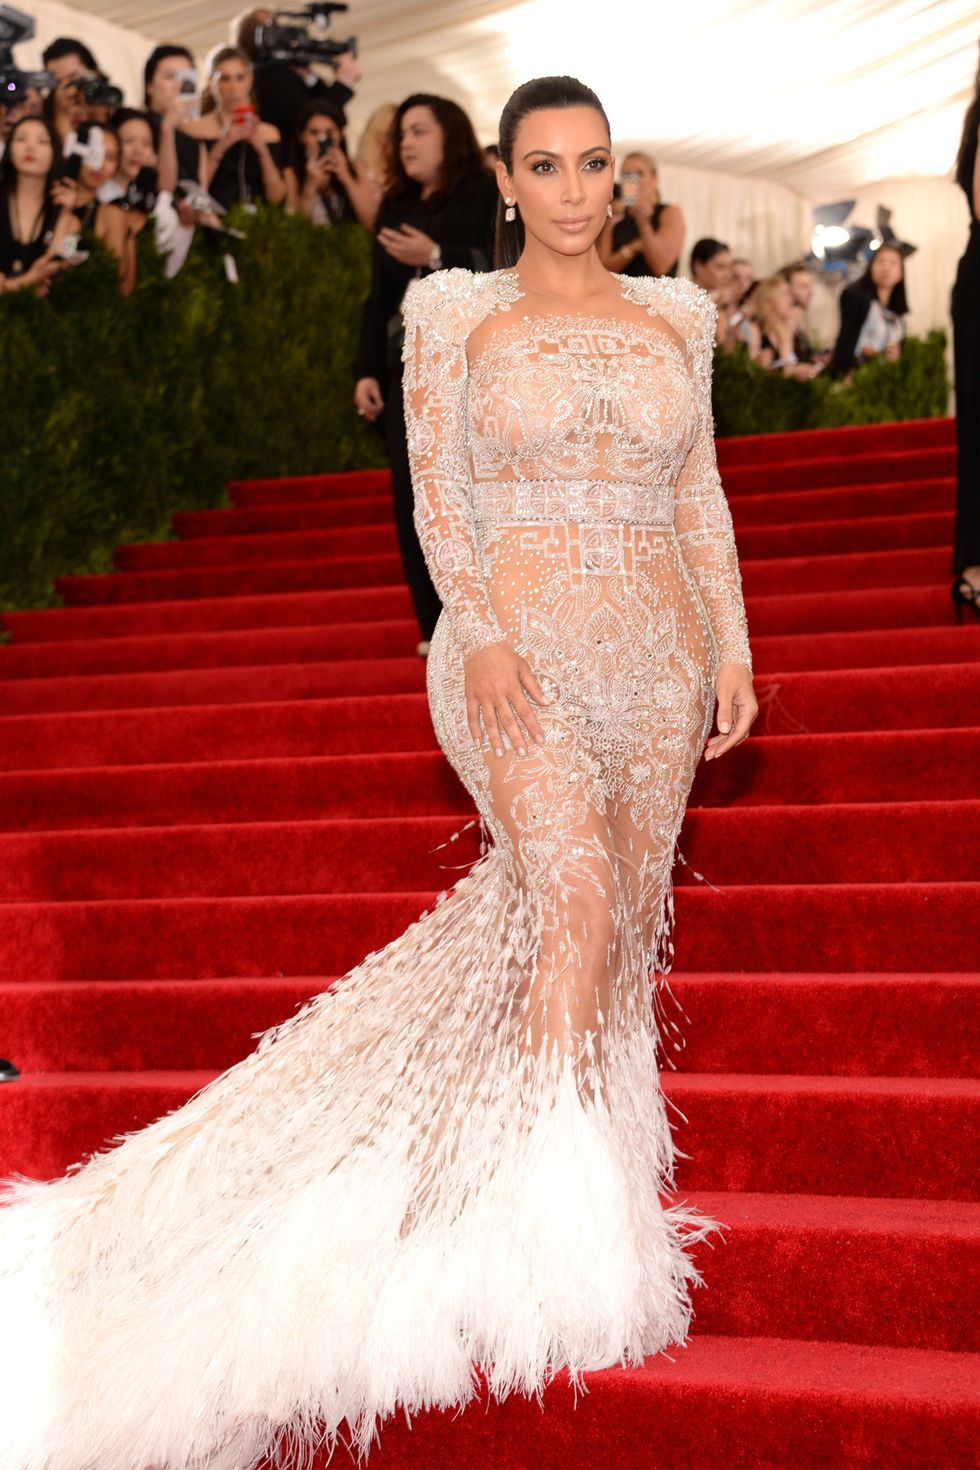 The Most Scandalous Met Gala Dresses of All Time